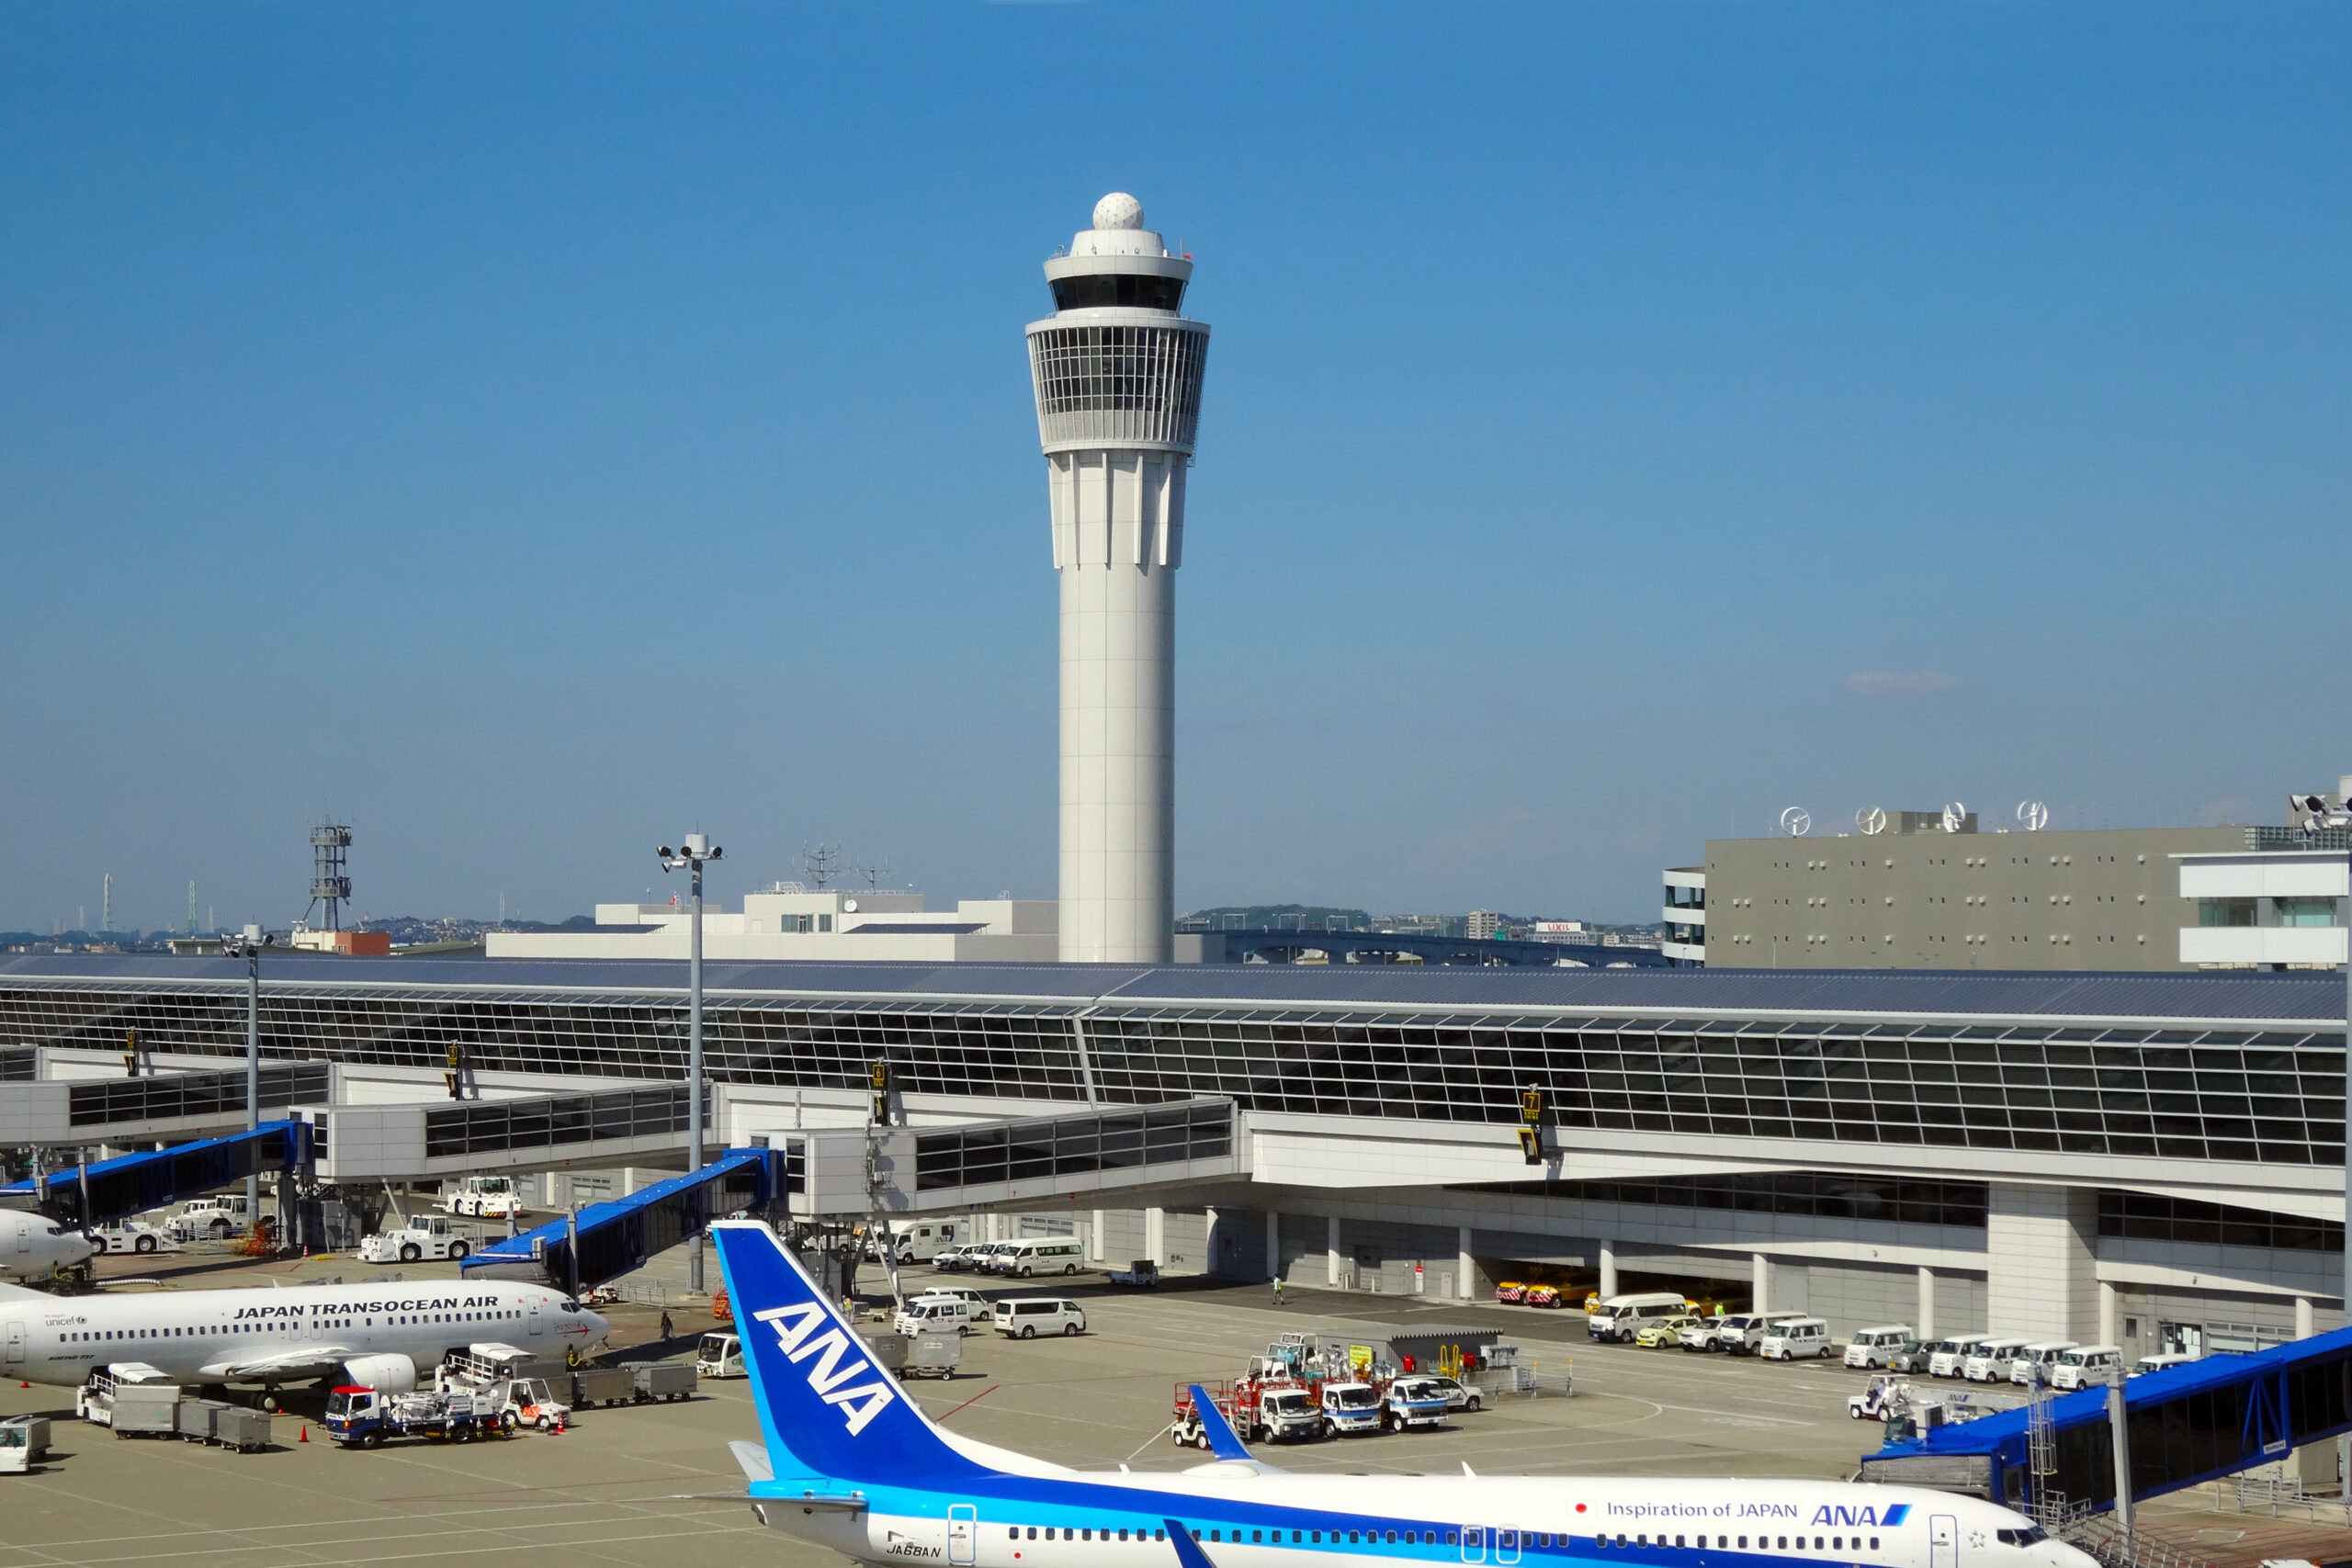 Chubu Centrair International Airport Administration Office Building and Control Tower